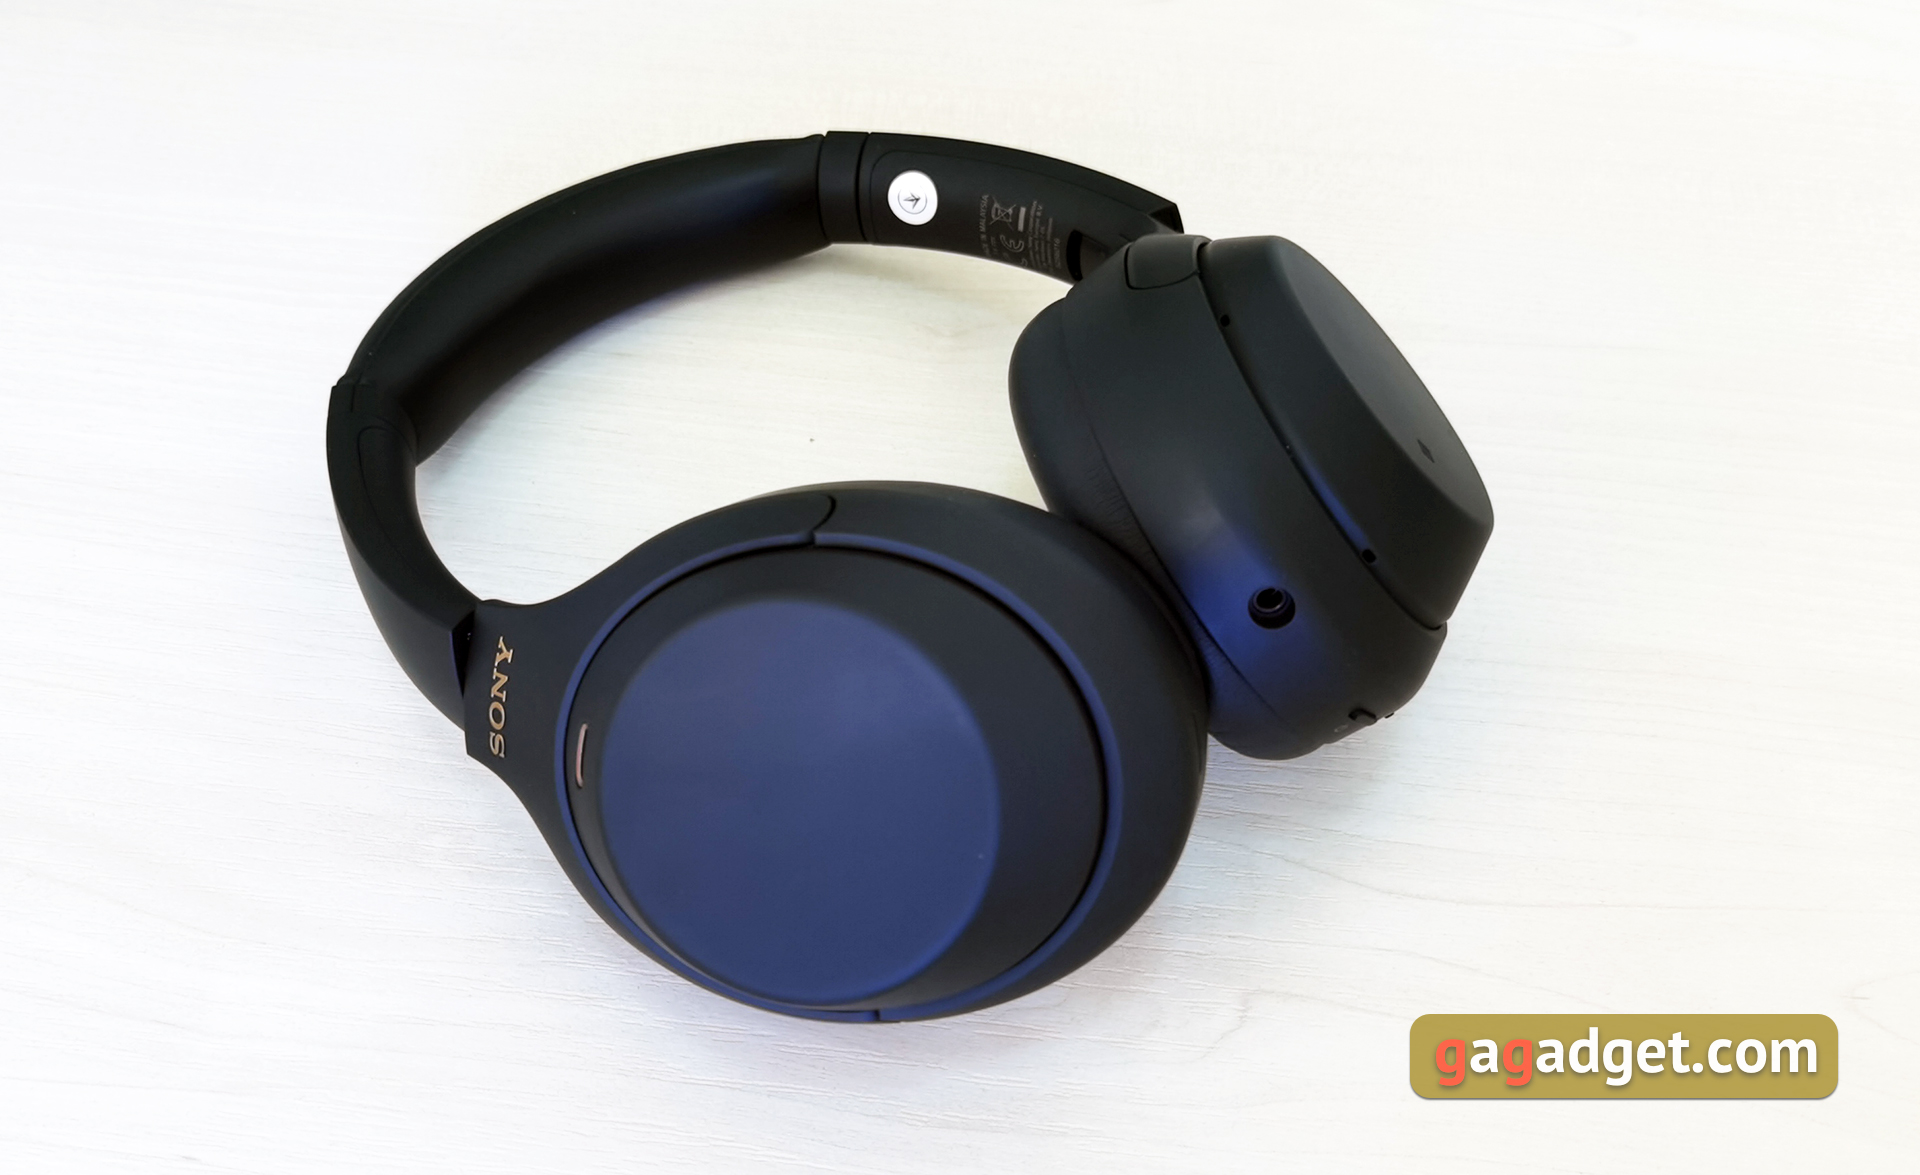 Sony WH-1000XM4 review: still the best full-size noise-cancelling headphones